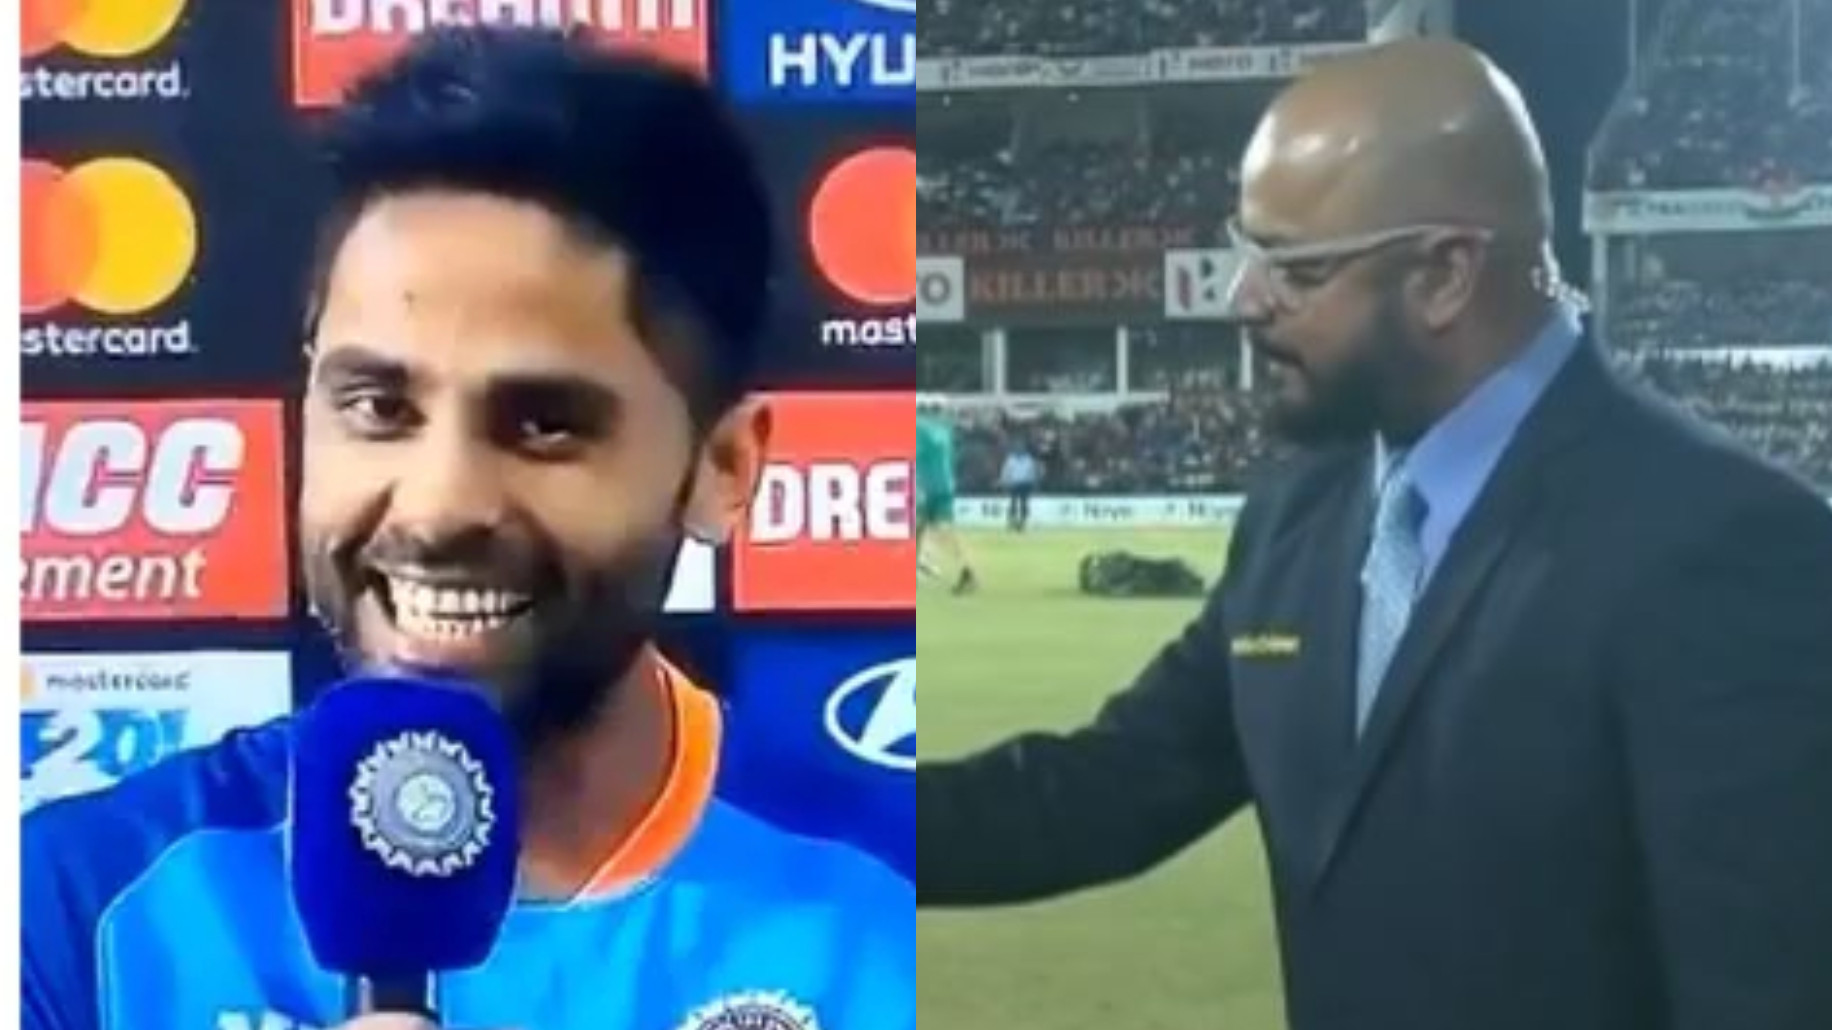 IND v AUS 2022: WATCH- Suryakumar Yadav gives apt reply to Murali Kartik’s comment on India being 0-1 down